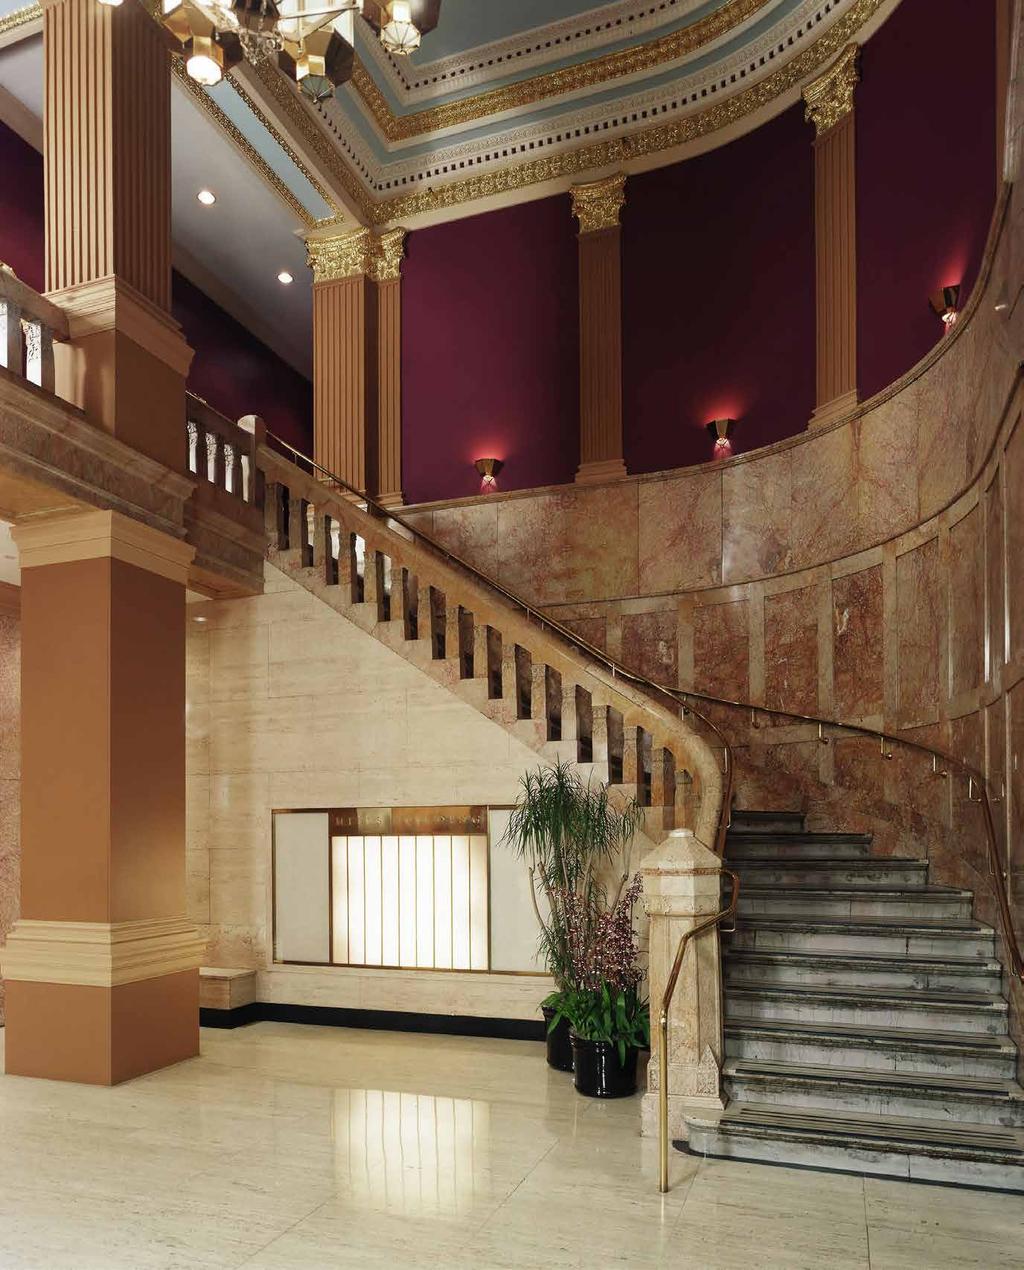 SACE FEATURES Grand staircase entry from